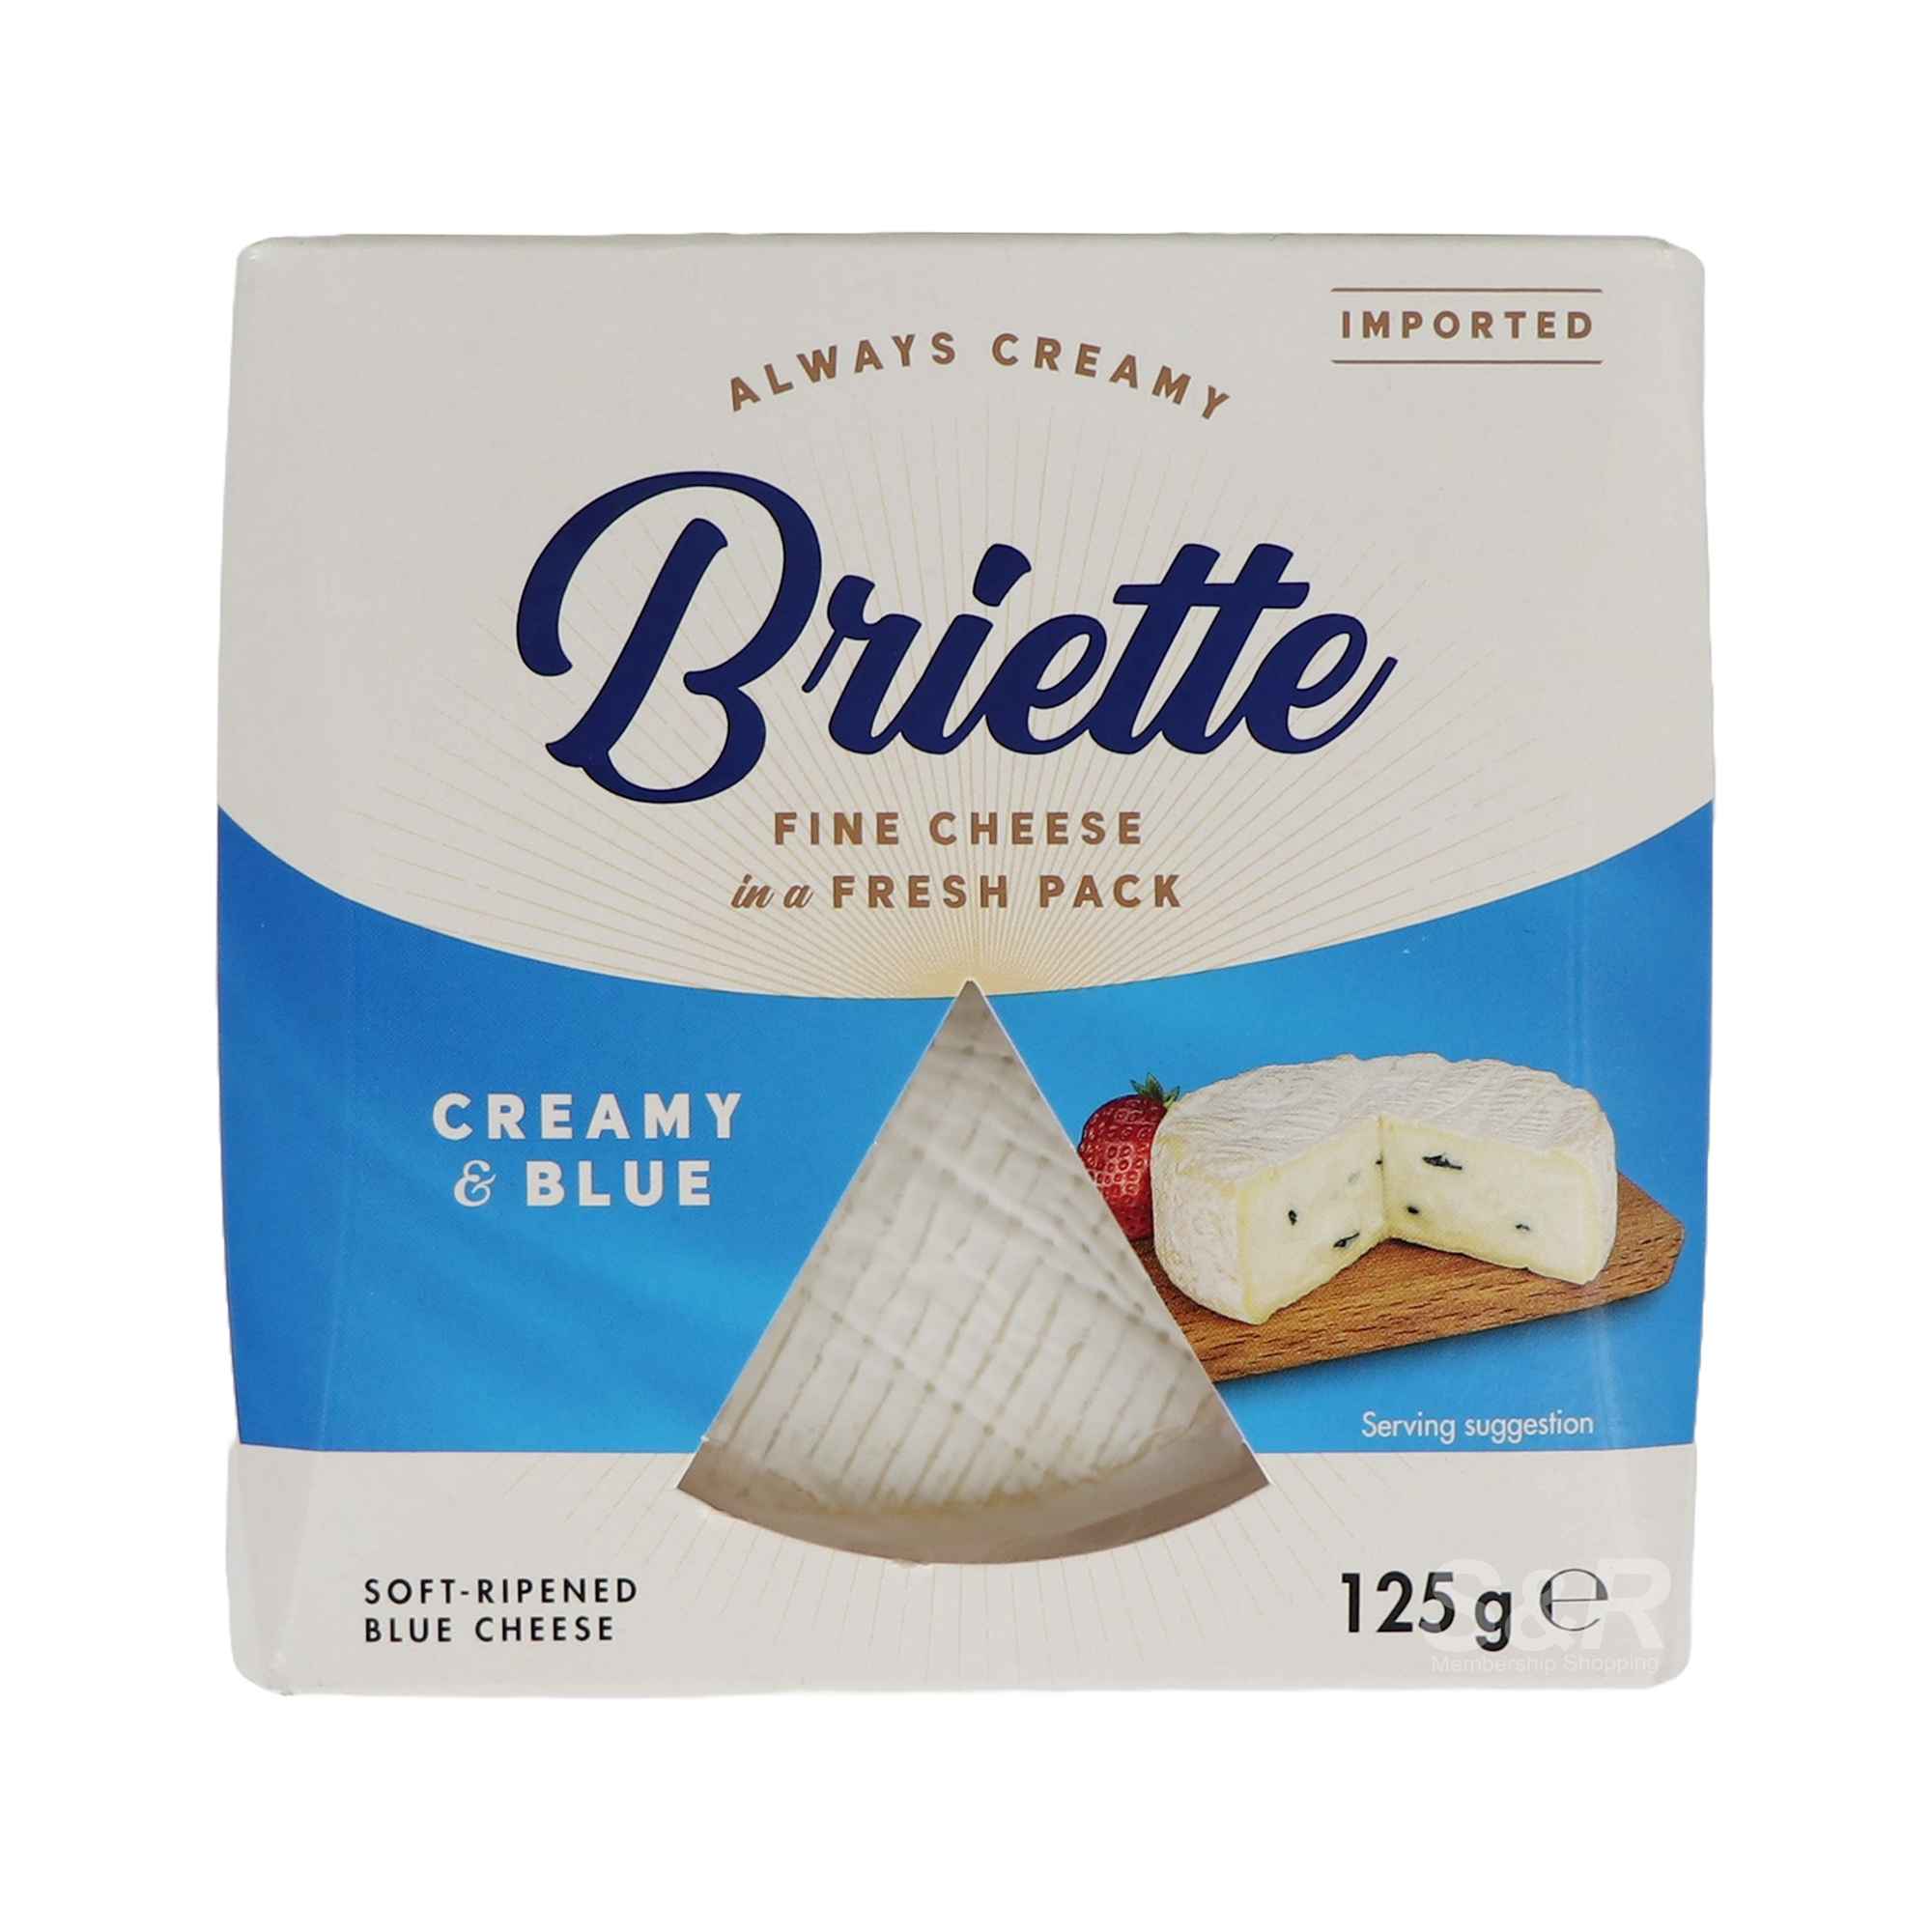 Briette Creamy and Blue Soft-Ripened Blue Cheese 125g